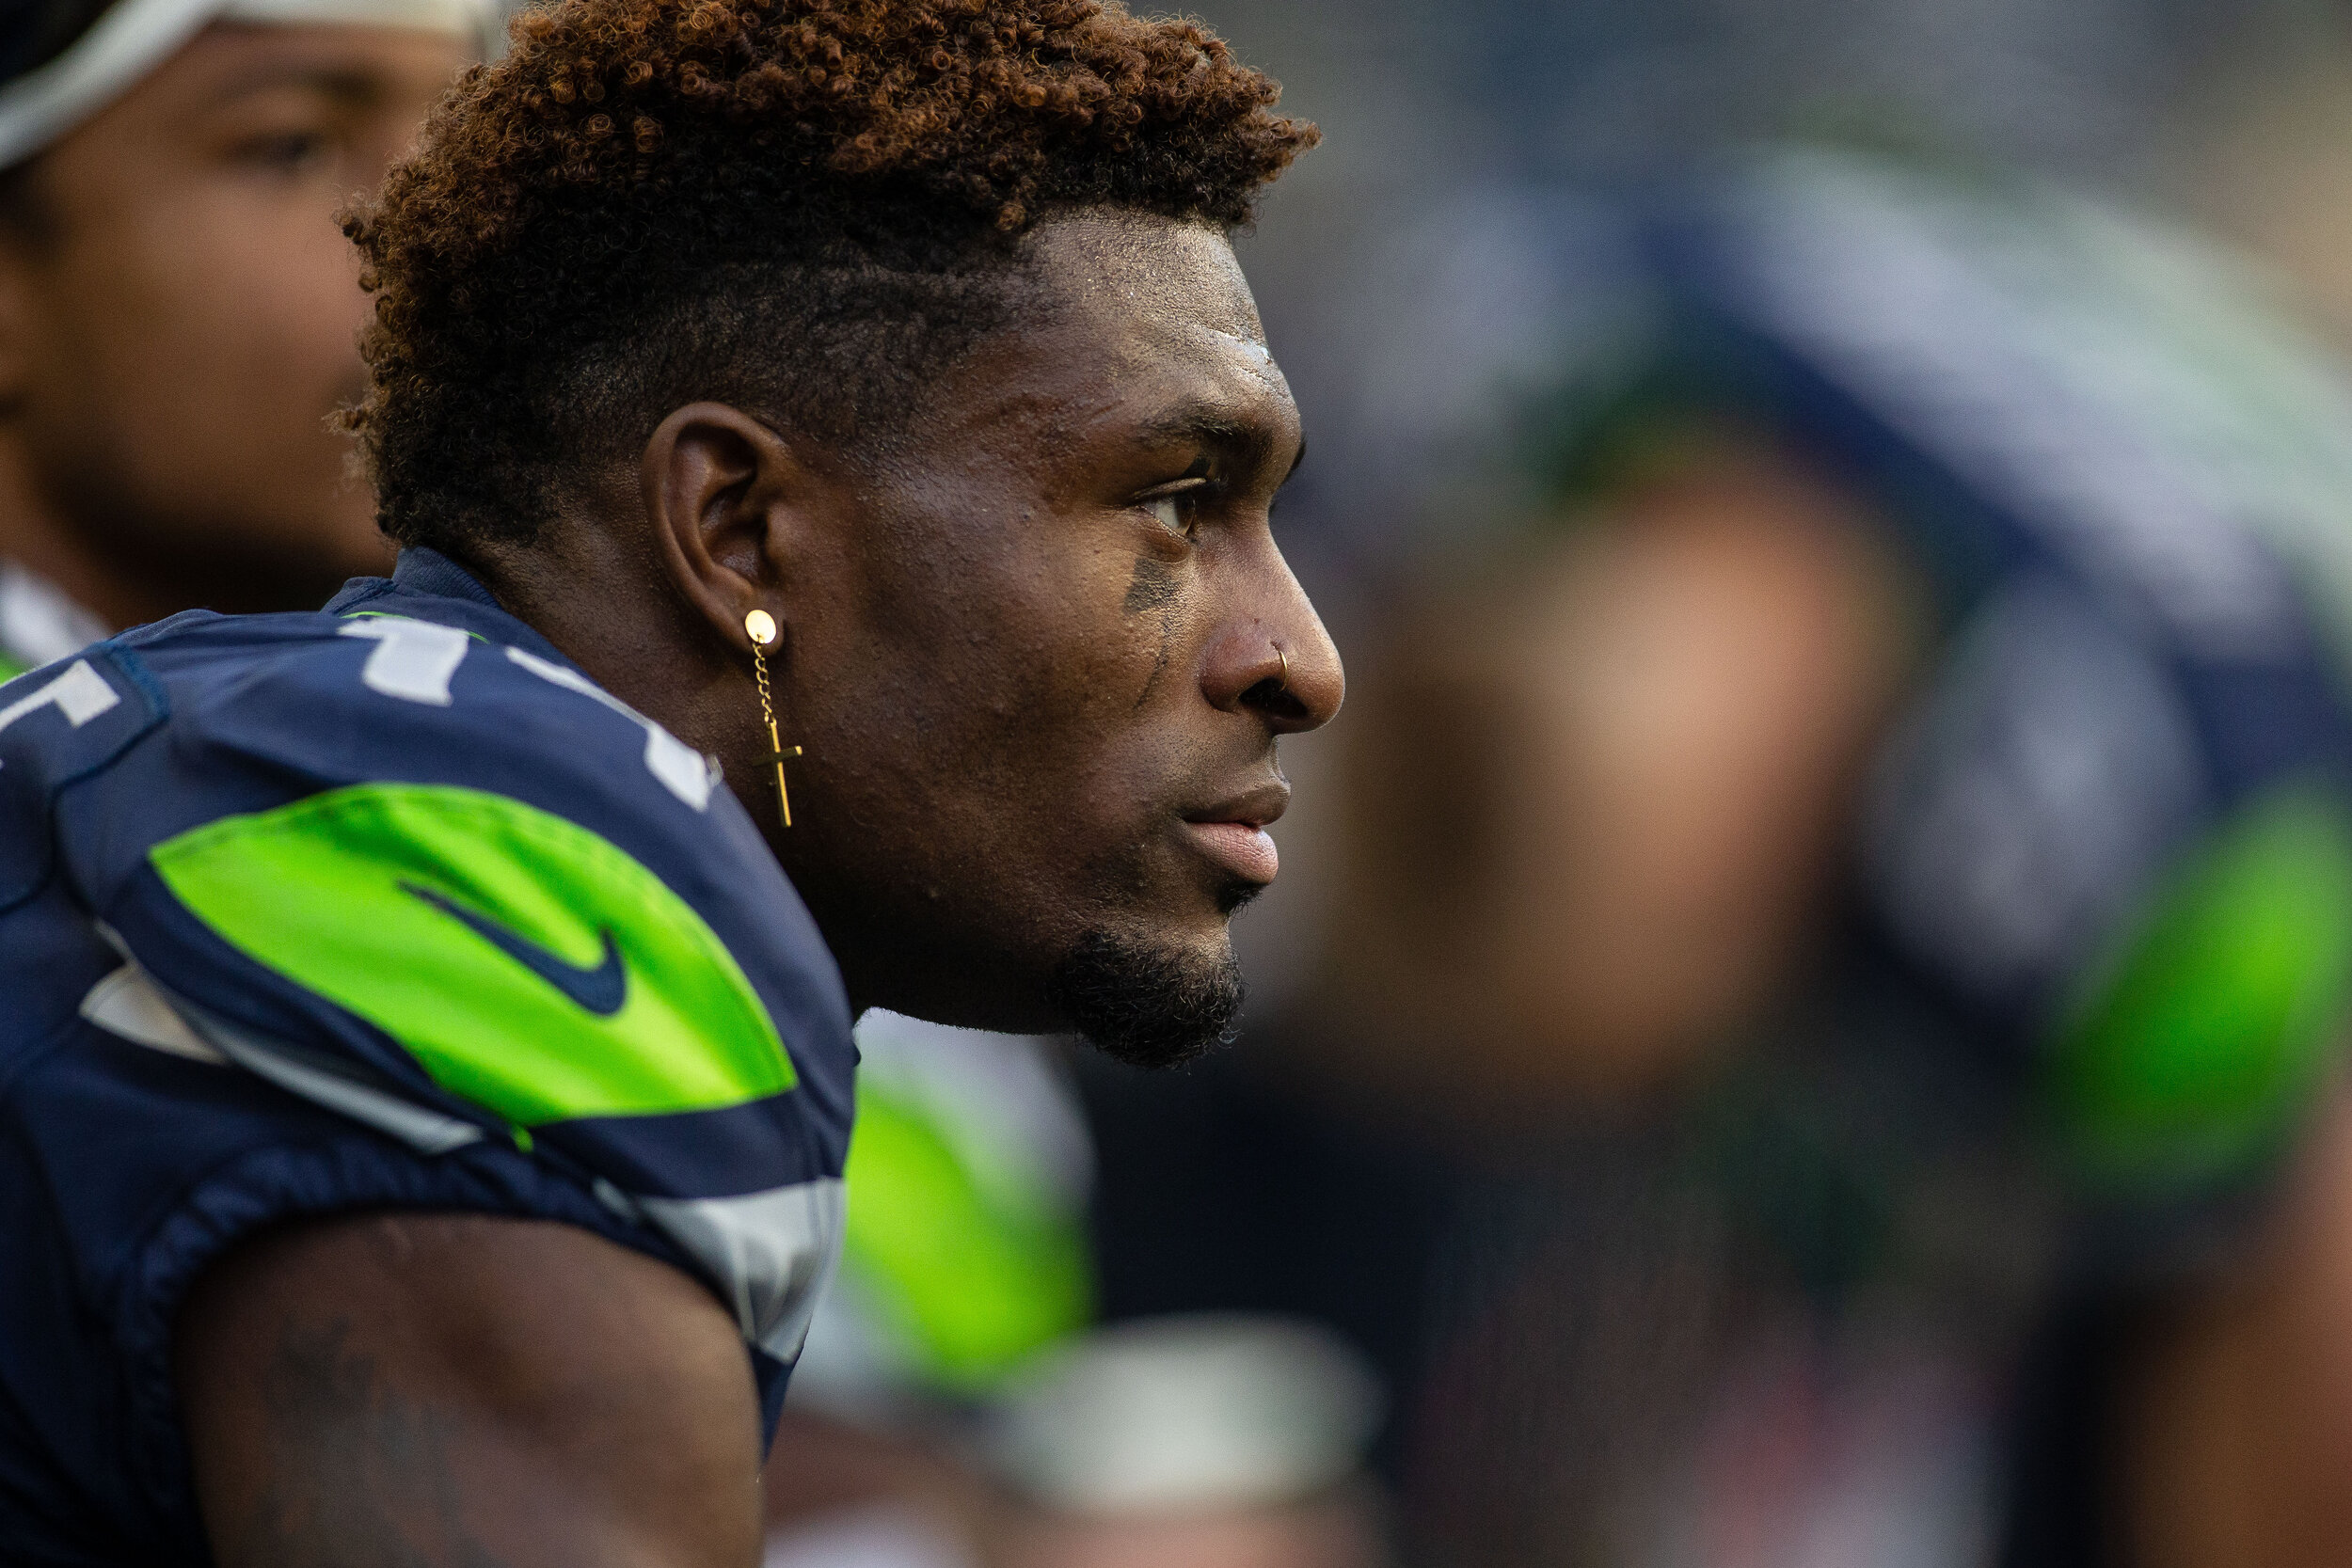  Seattle Seahawks wide receiver D.K. Metcalf (14) on the sidelines during the fourth quarter of an NFL football game against the Tampa Bay Buccaneers, Sunday, Nov. 3, 2019, in Seattle. Seattle defeated Tampa Bay 40-34 in overtime. (Matt Ferris/Image 